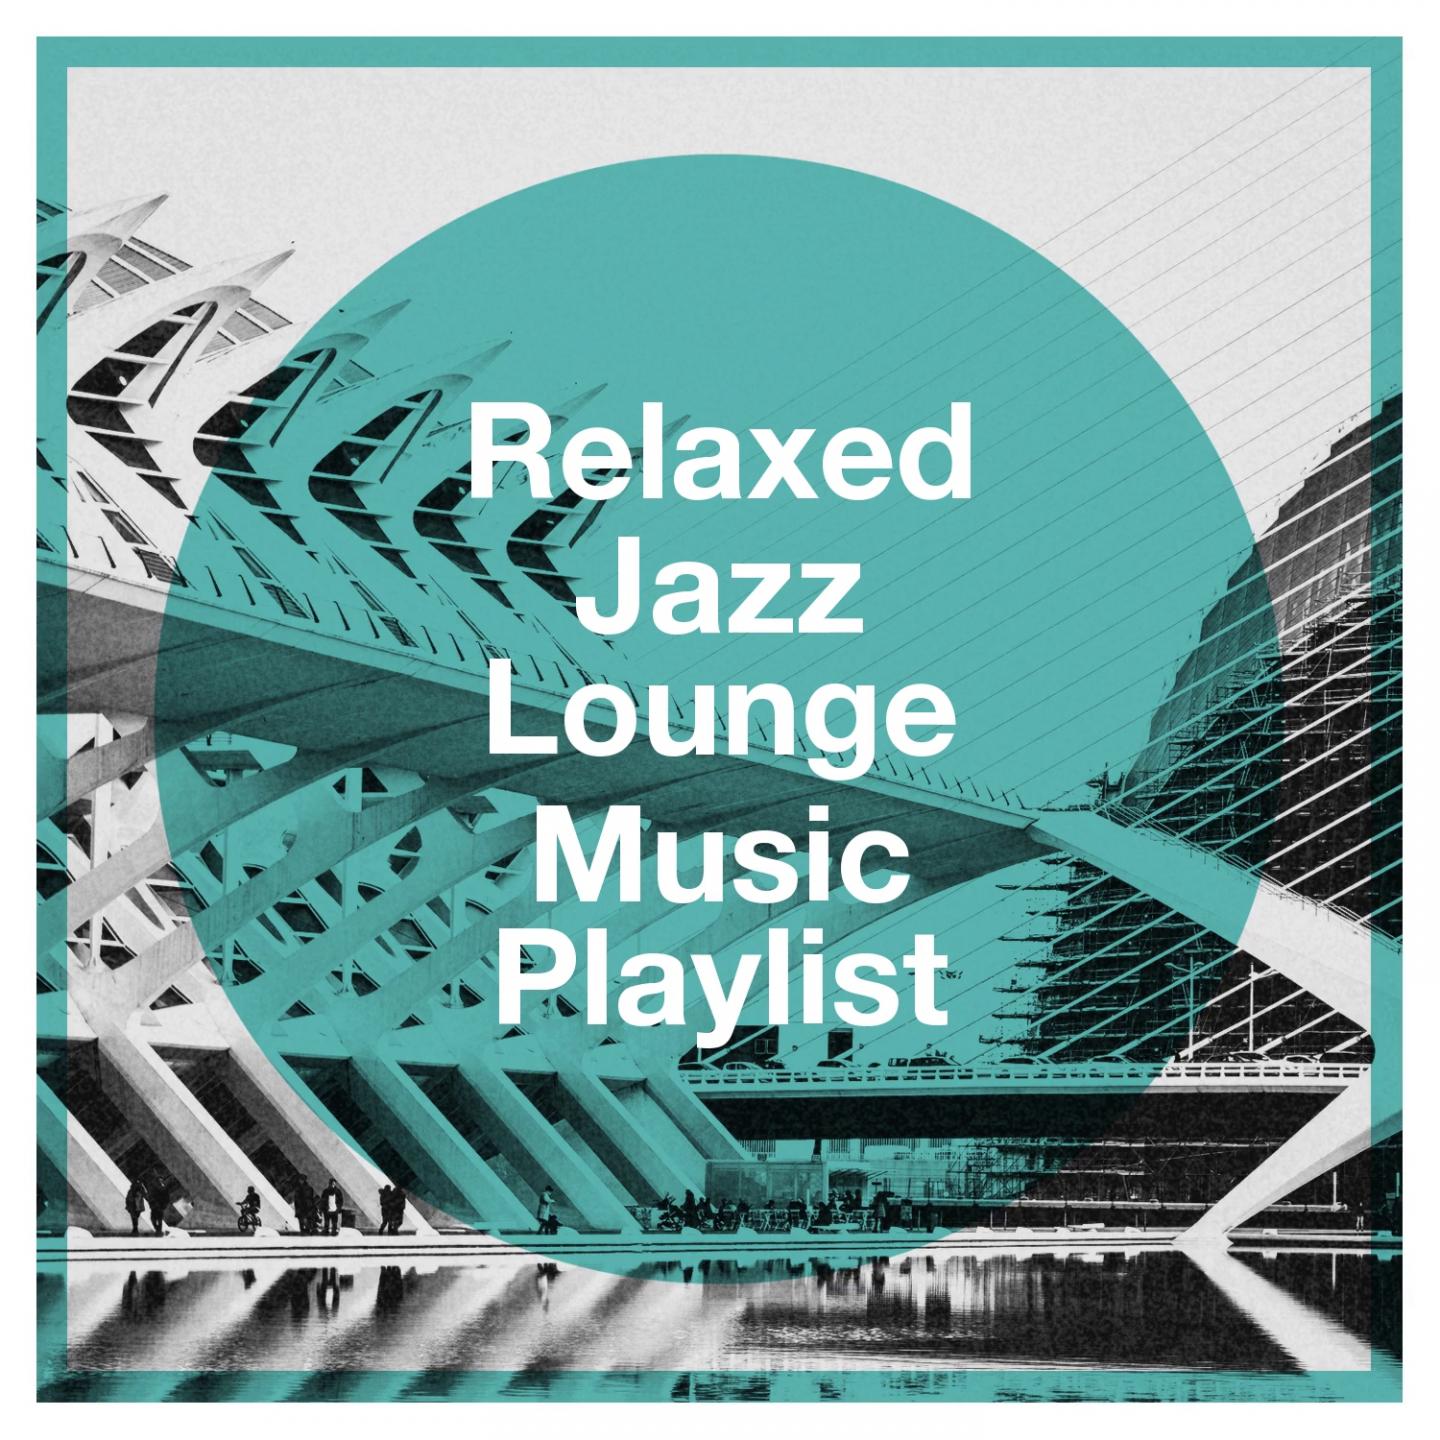 Relaxed Jazz Lounge Music Playlist